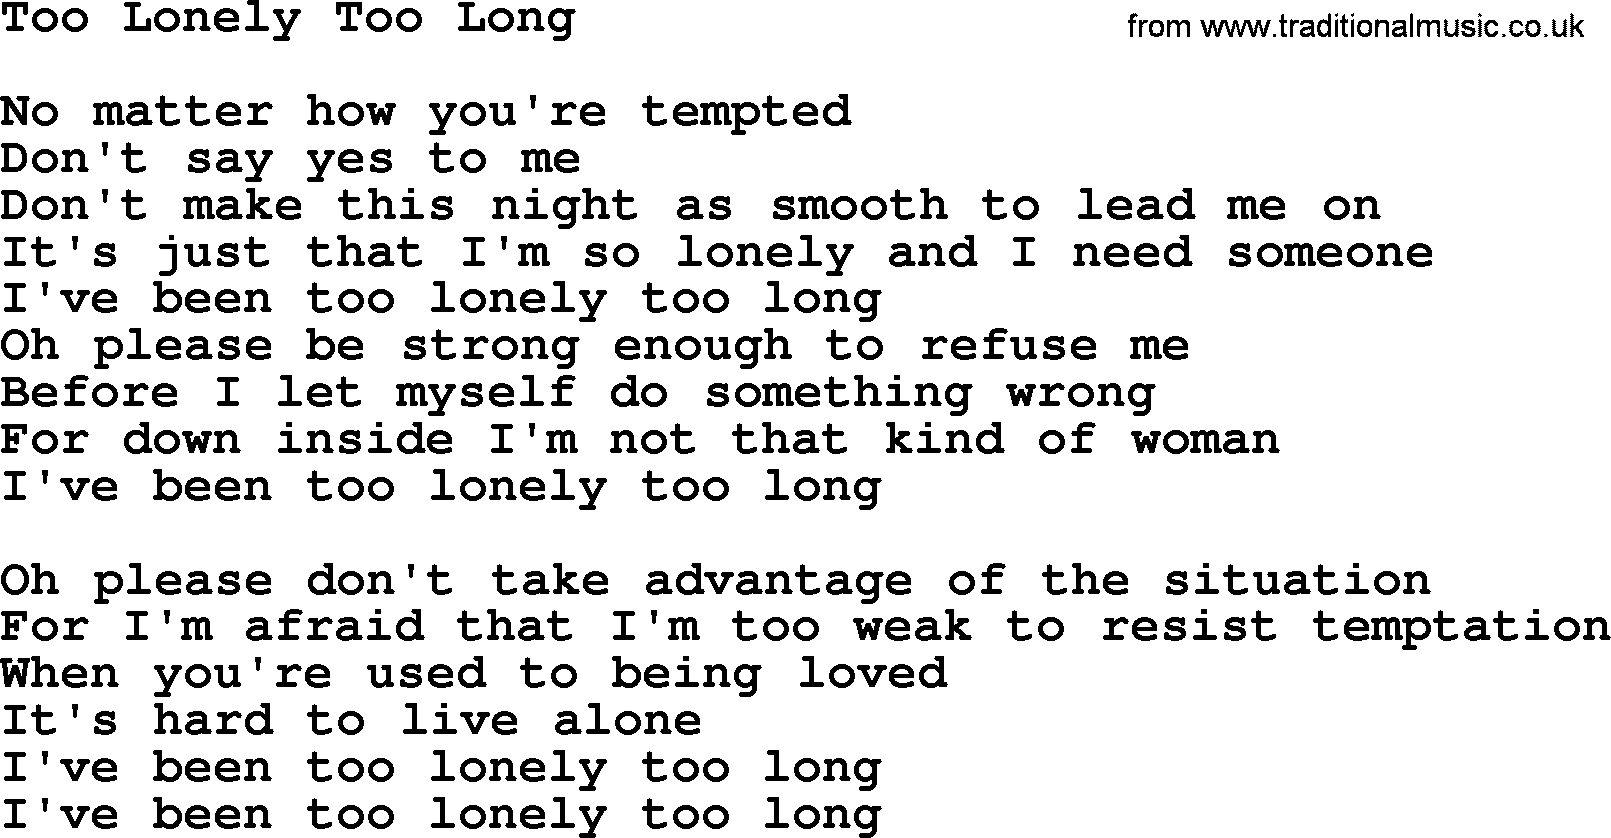 Dolly Parton song Too Lonely Too Long.txt lyrics